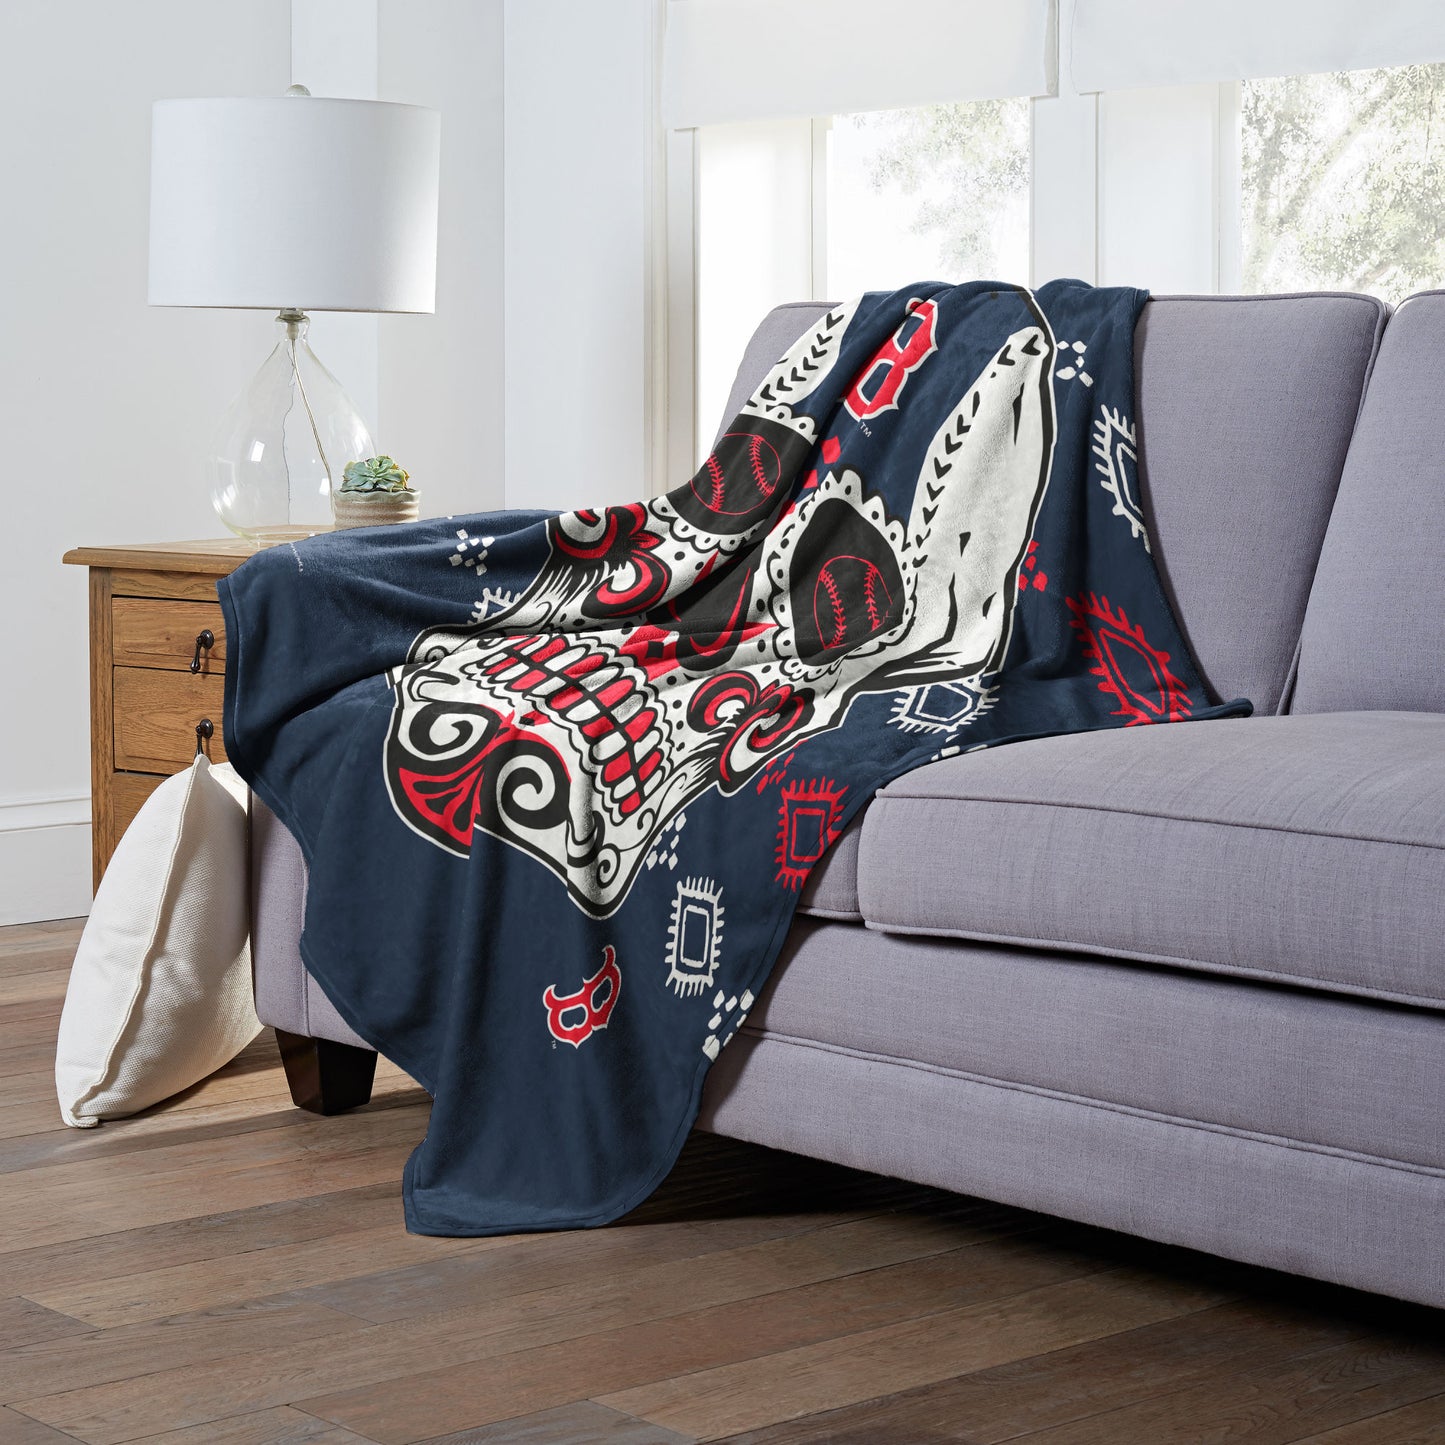 CANDY SKULL - RED SOX Silk Touch Throw 50"x60"